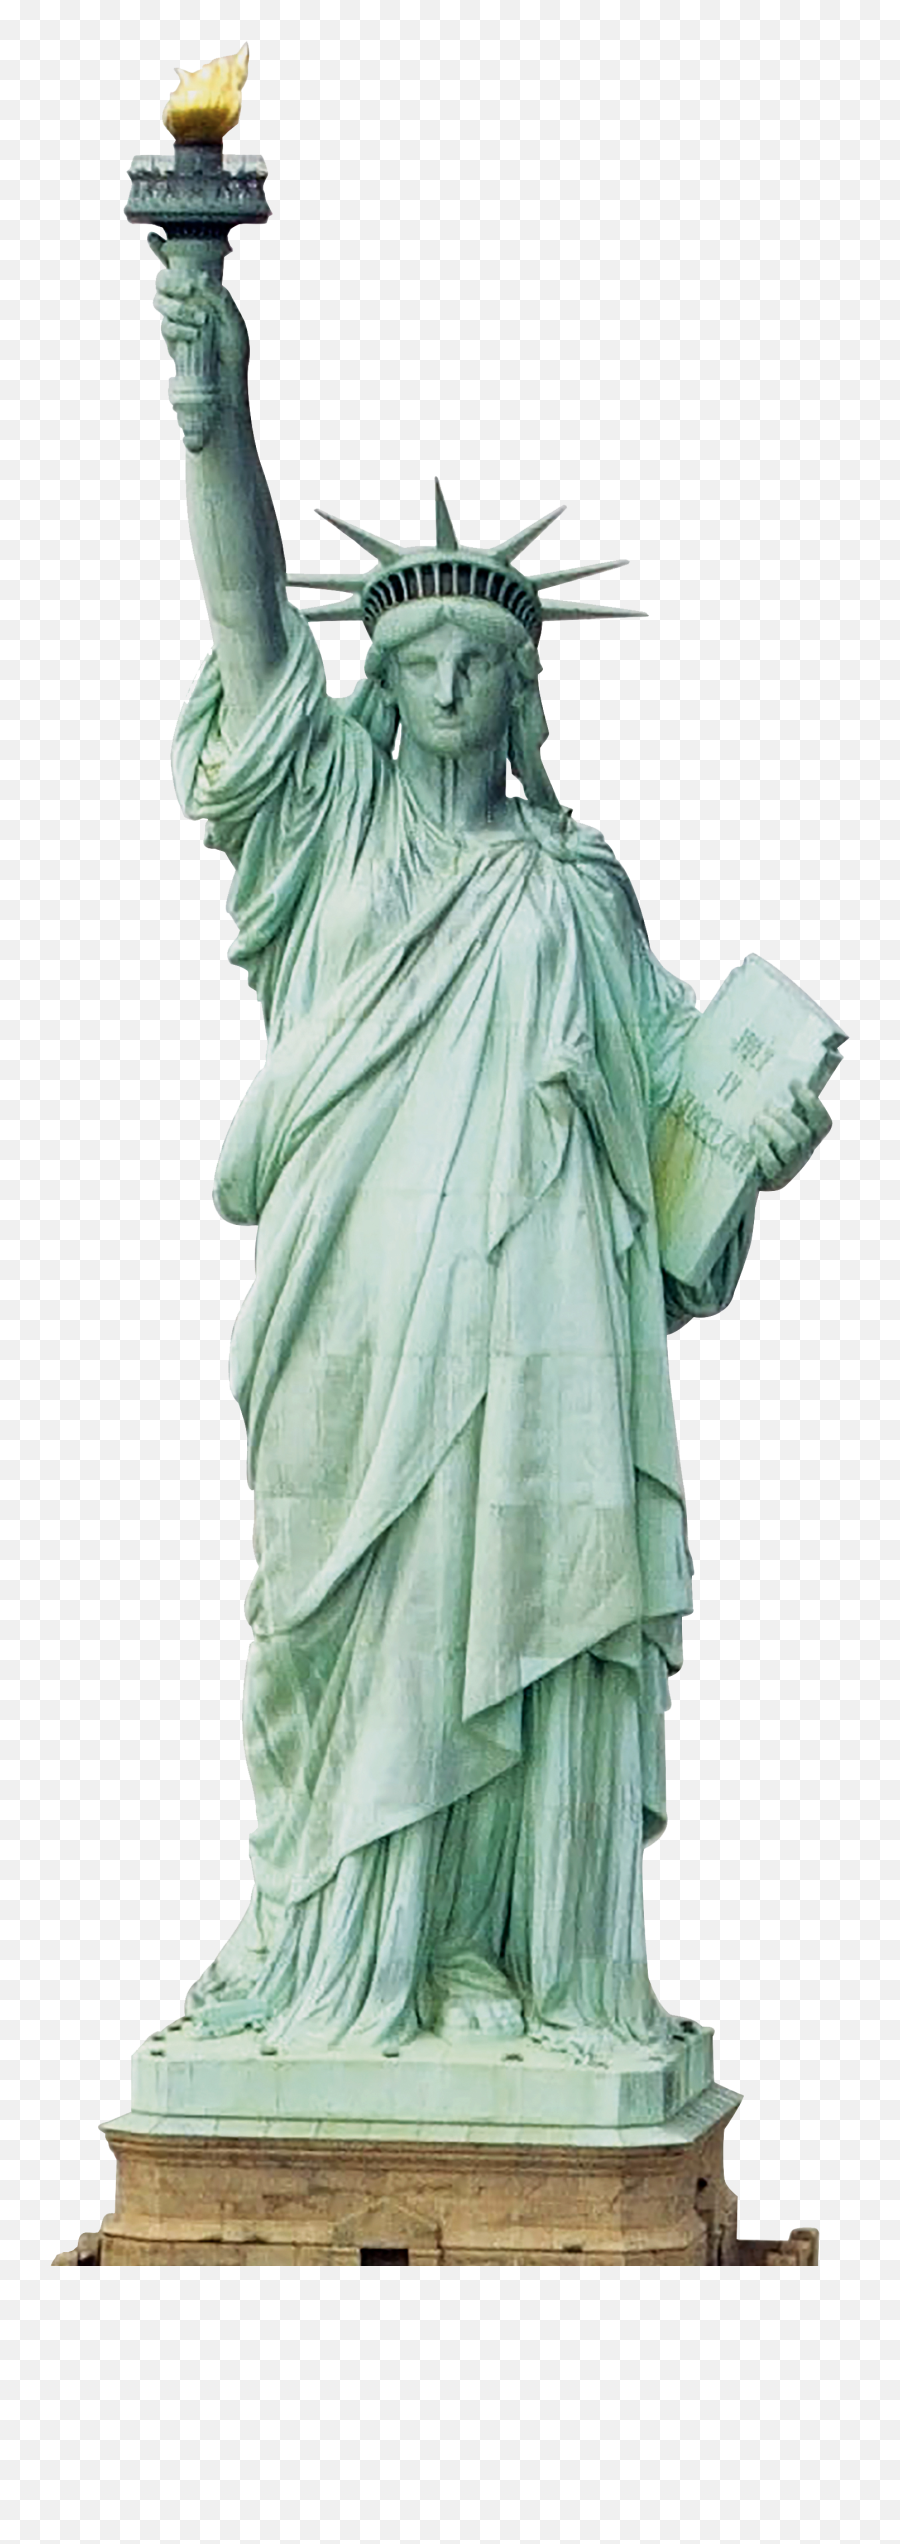 Statue Of Freedom Cardboard Cut Outs Png 48653 - Free Icons Statue Of Liberty,Cut Png